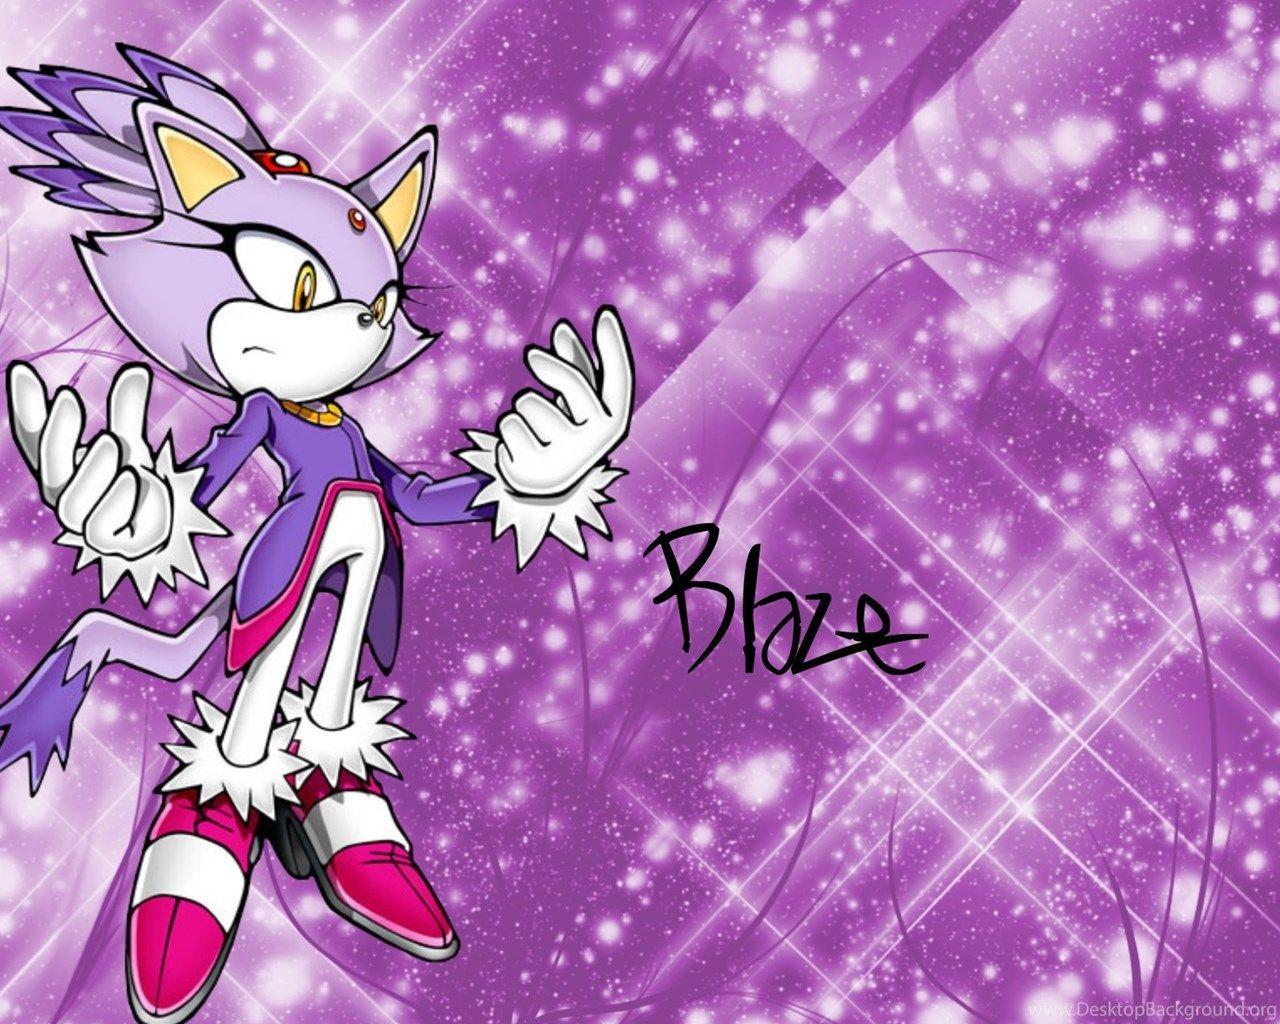 4K Blaze the Cat Wallpapers  Background Images